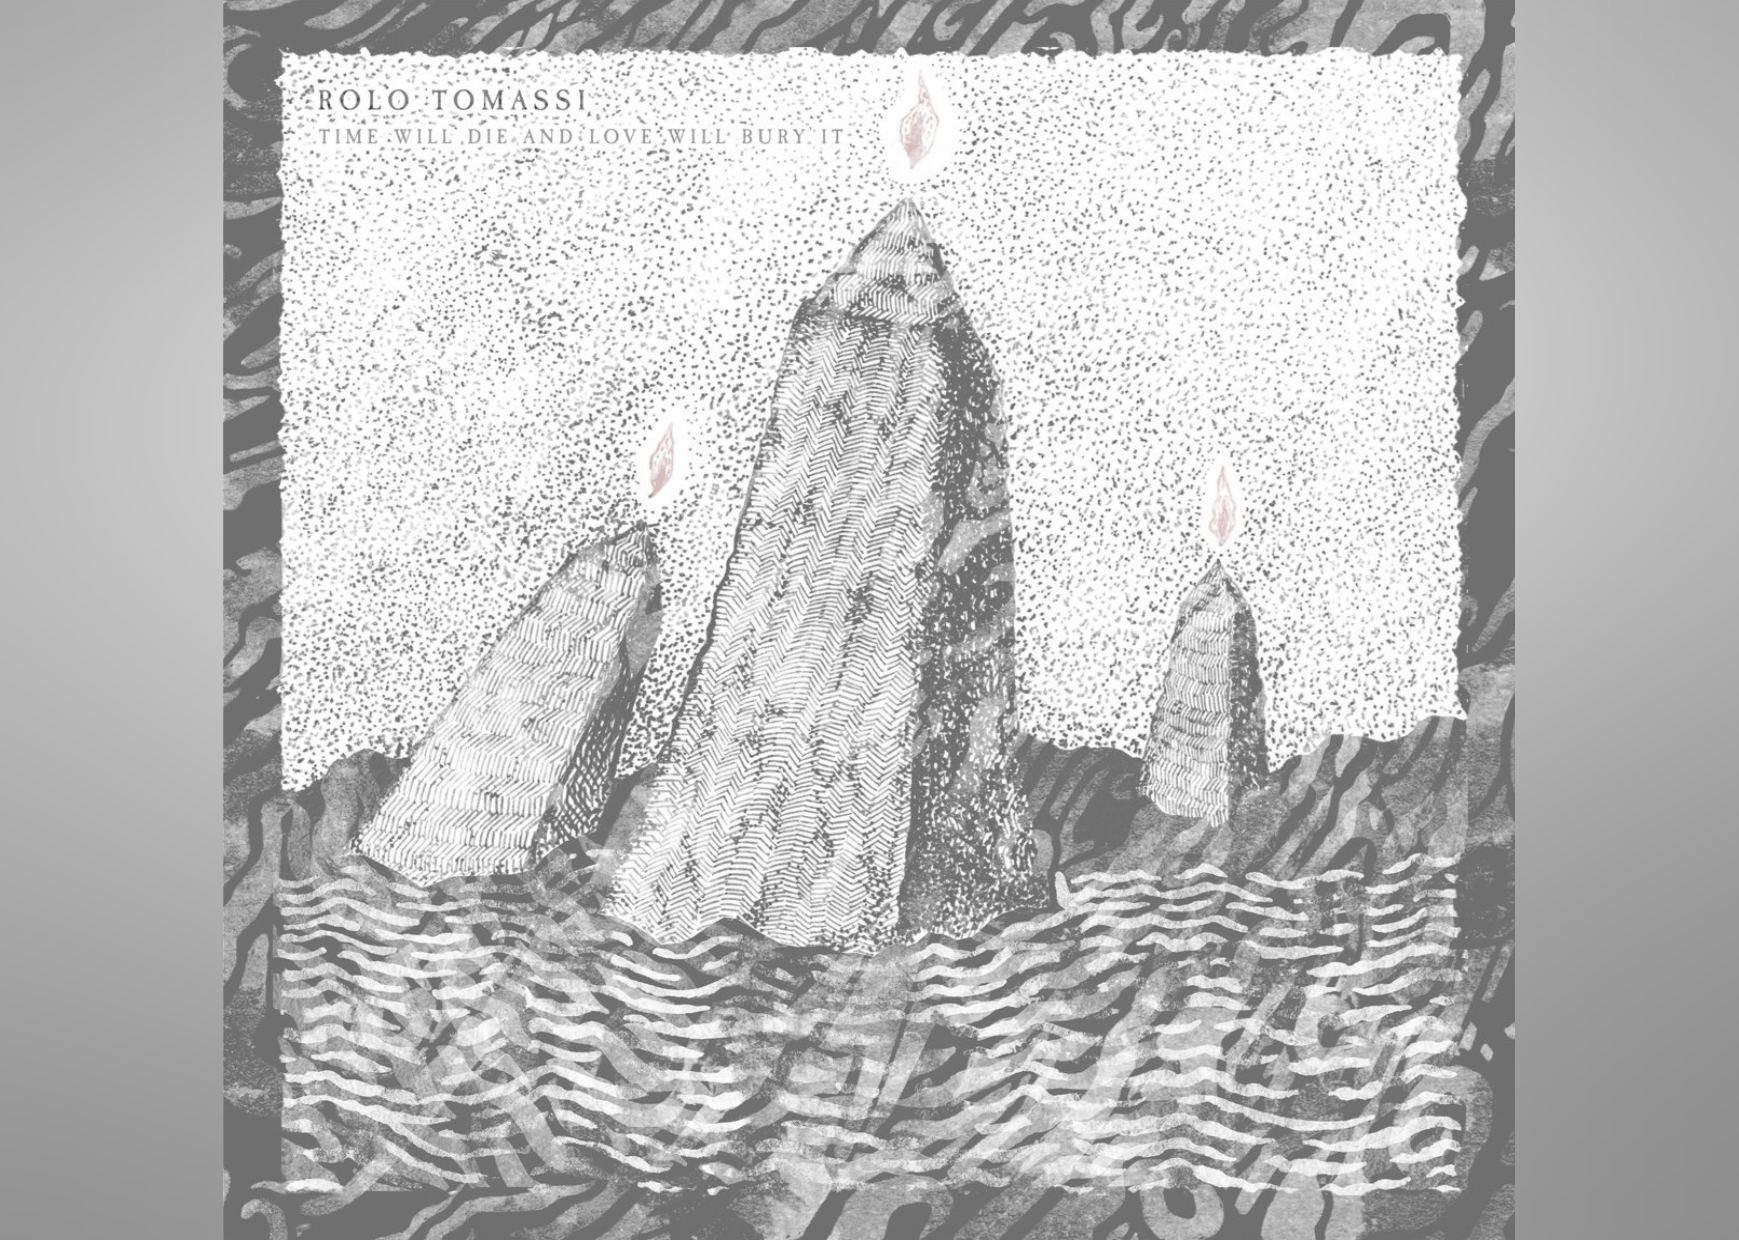 A drawing of three obelisks rising out of the sea lit like candles in black and white.